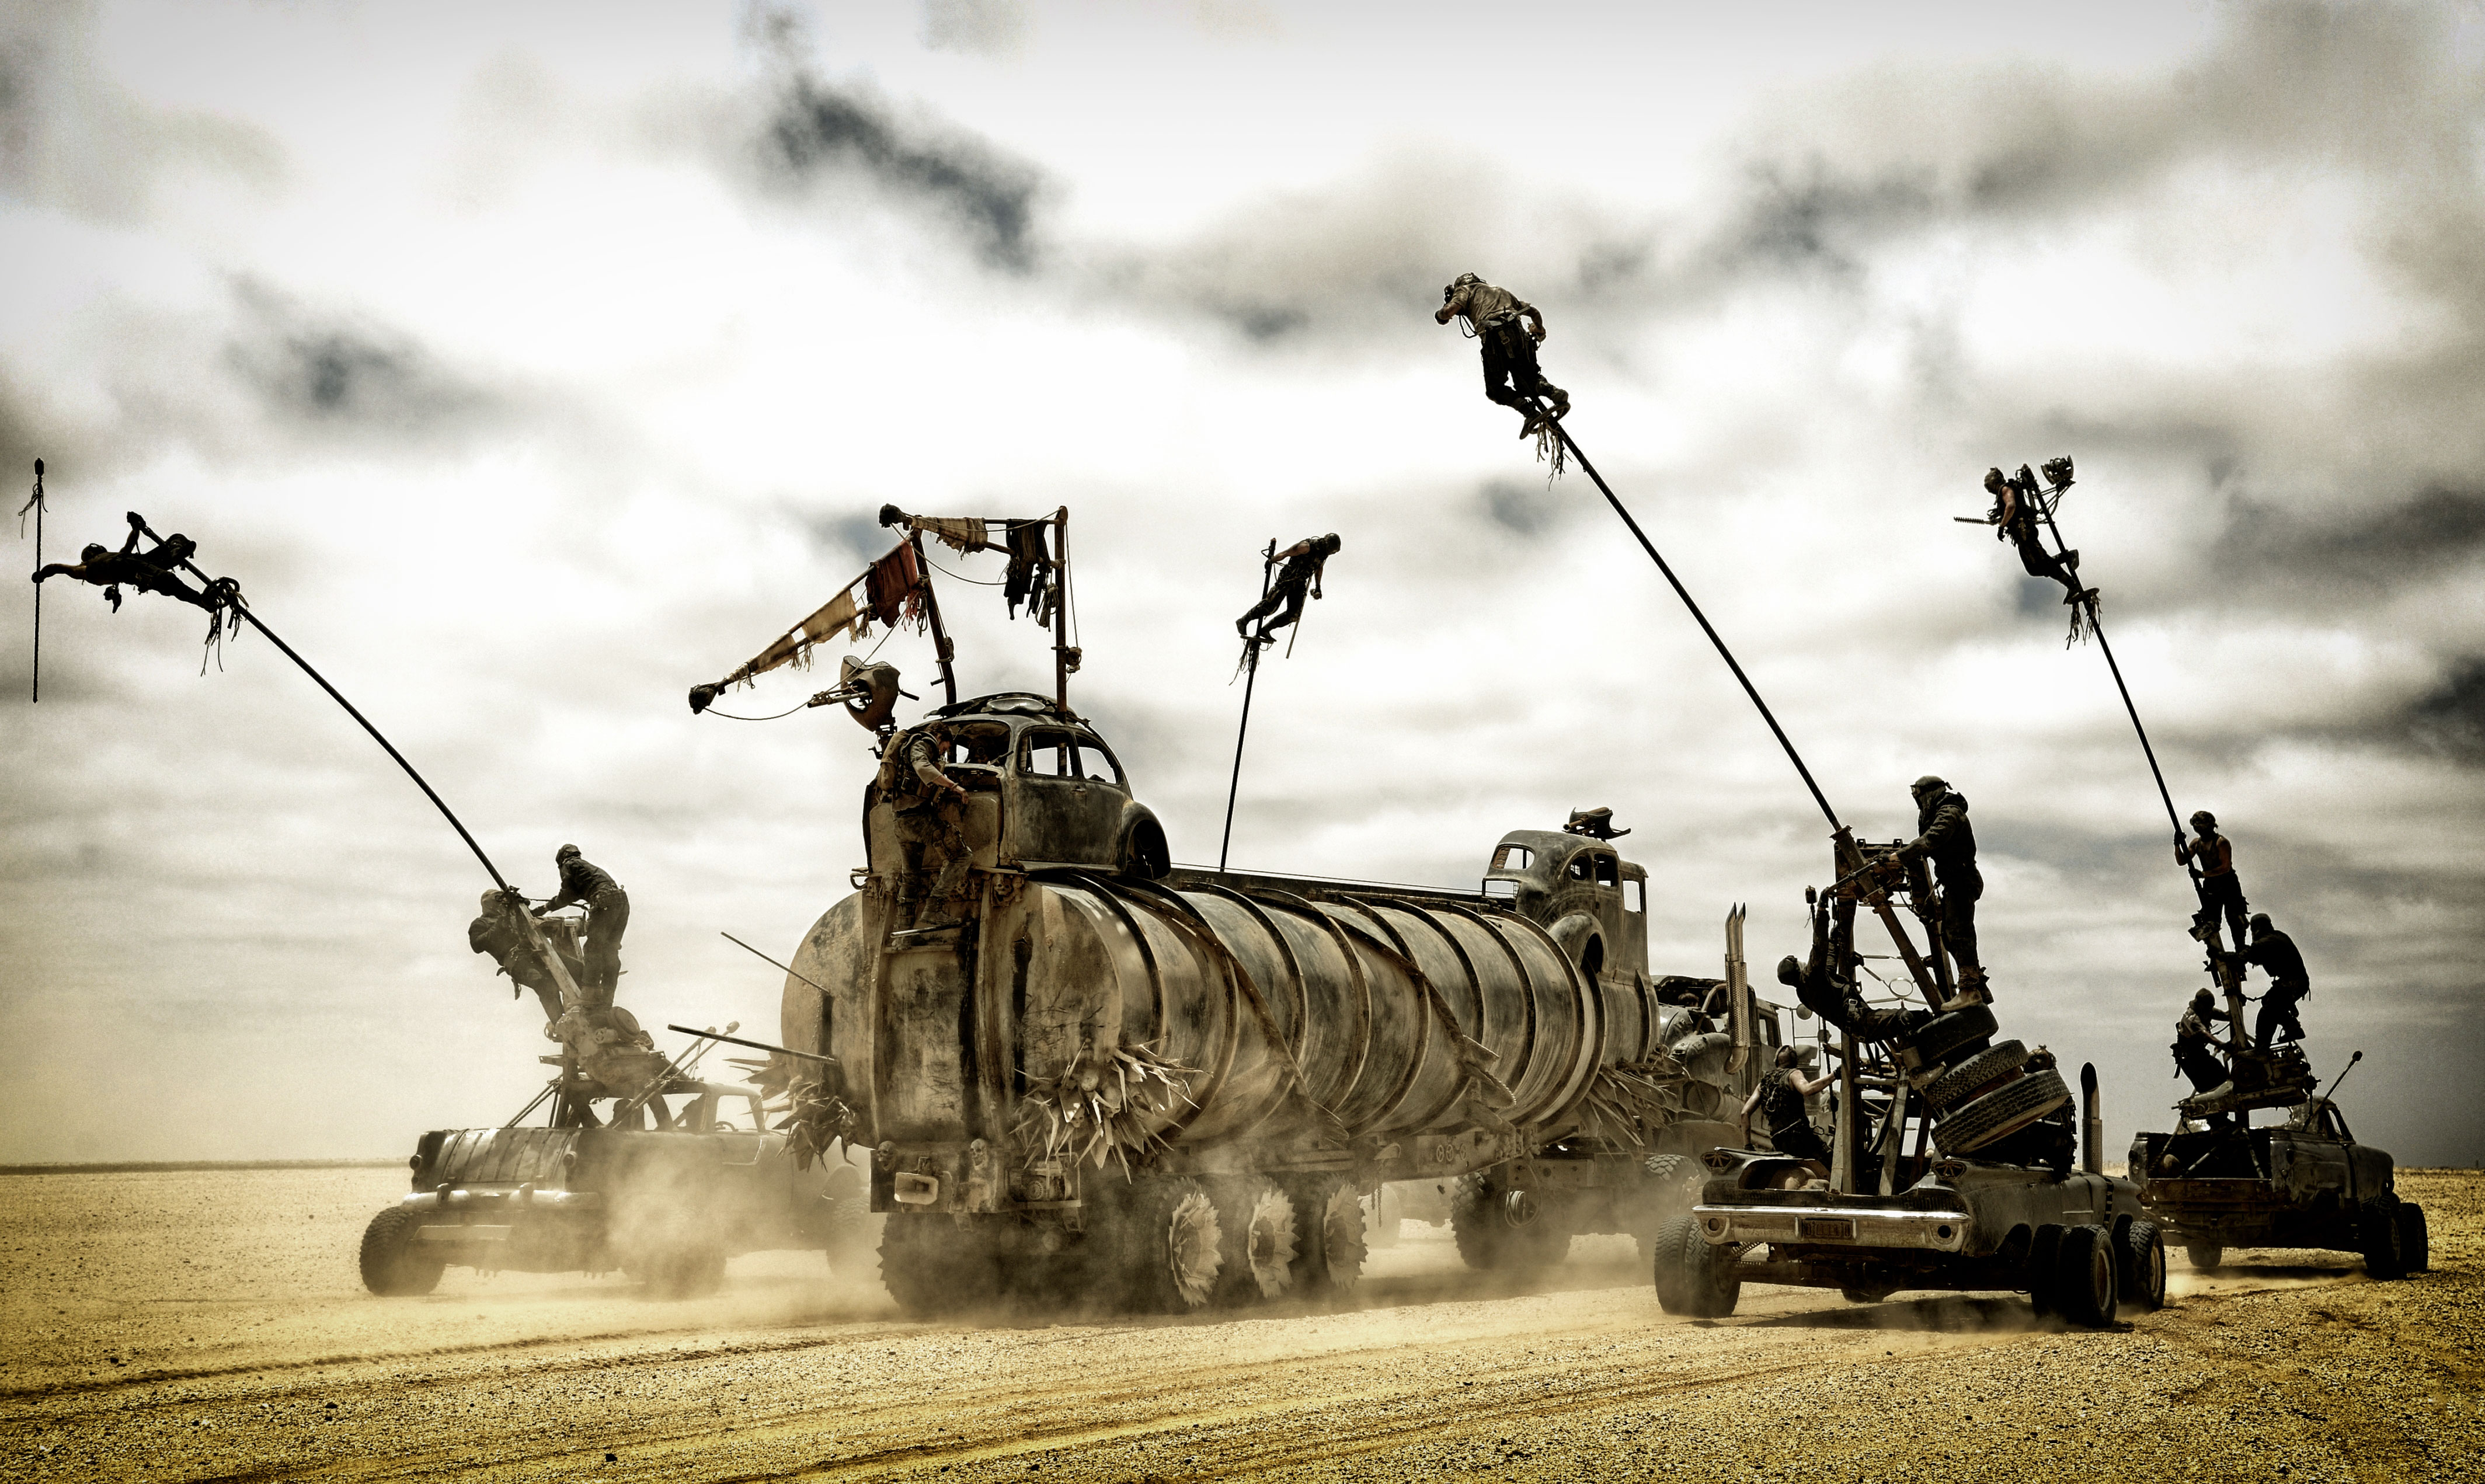 Movie Mad Max wallpapers (Desktop, Phone, Tablet) - Awesome Desktop ...